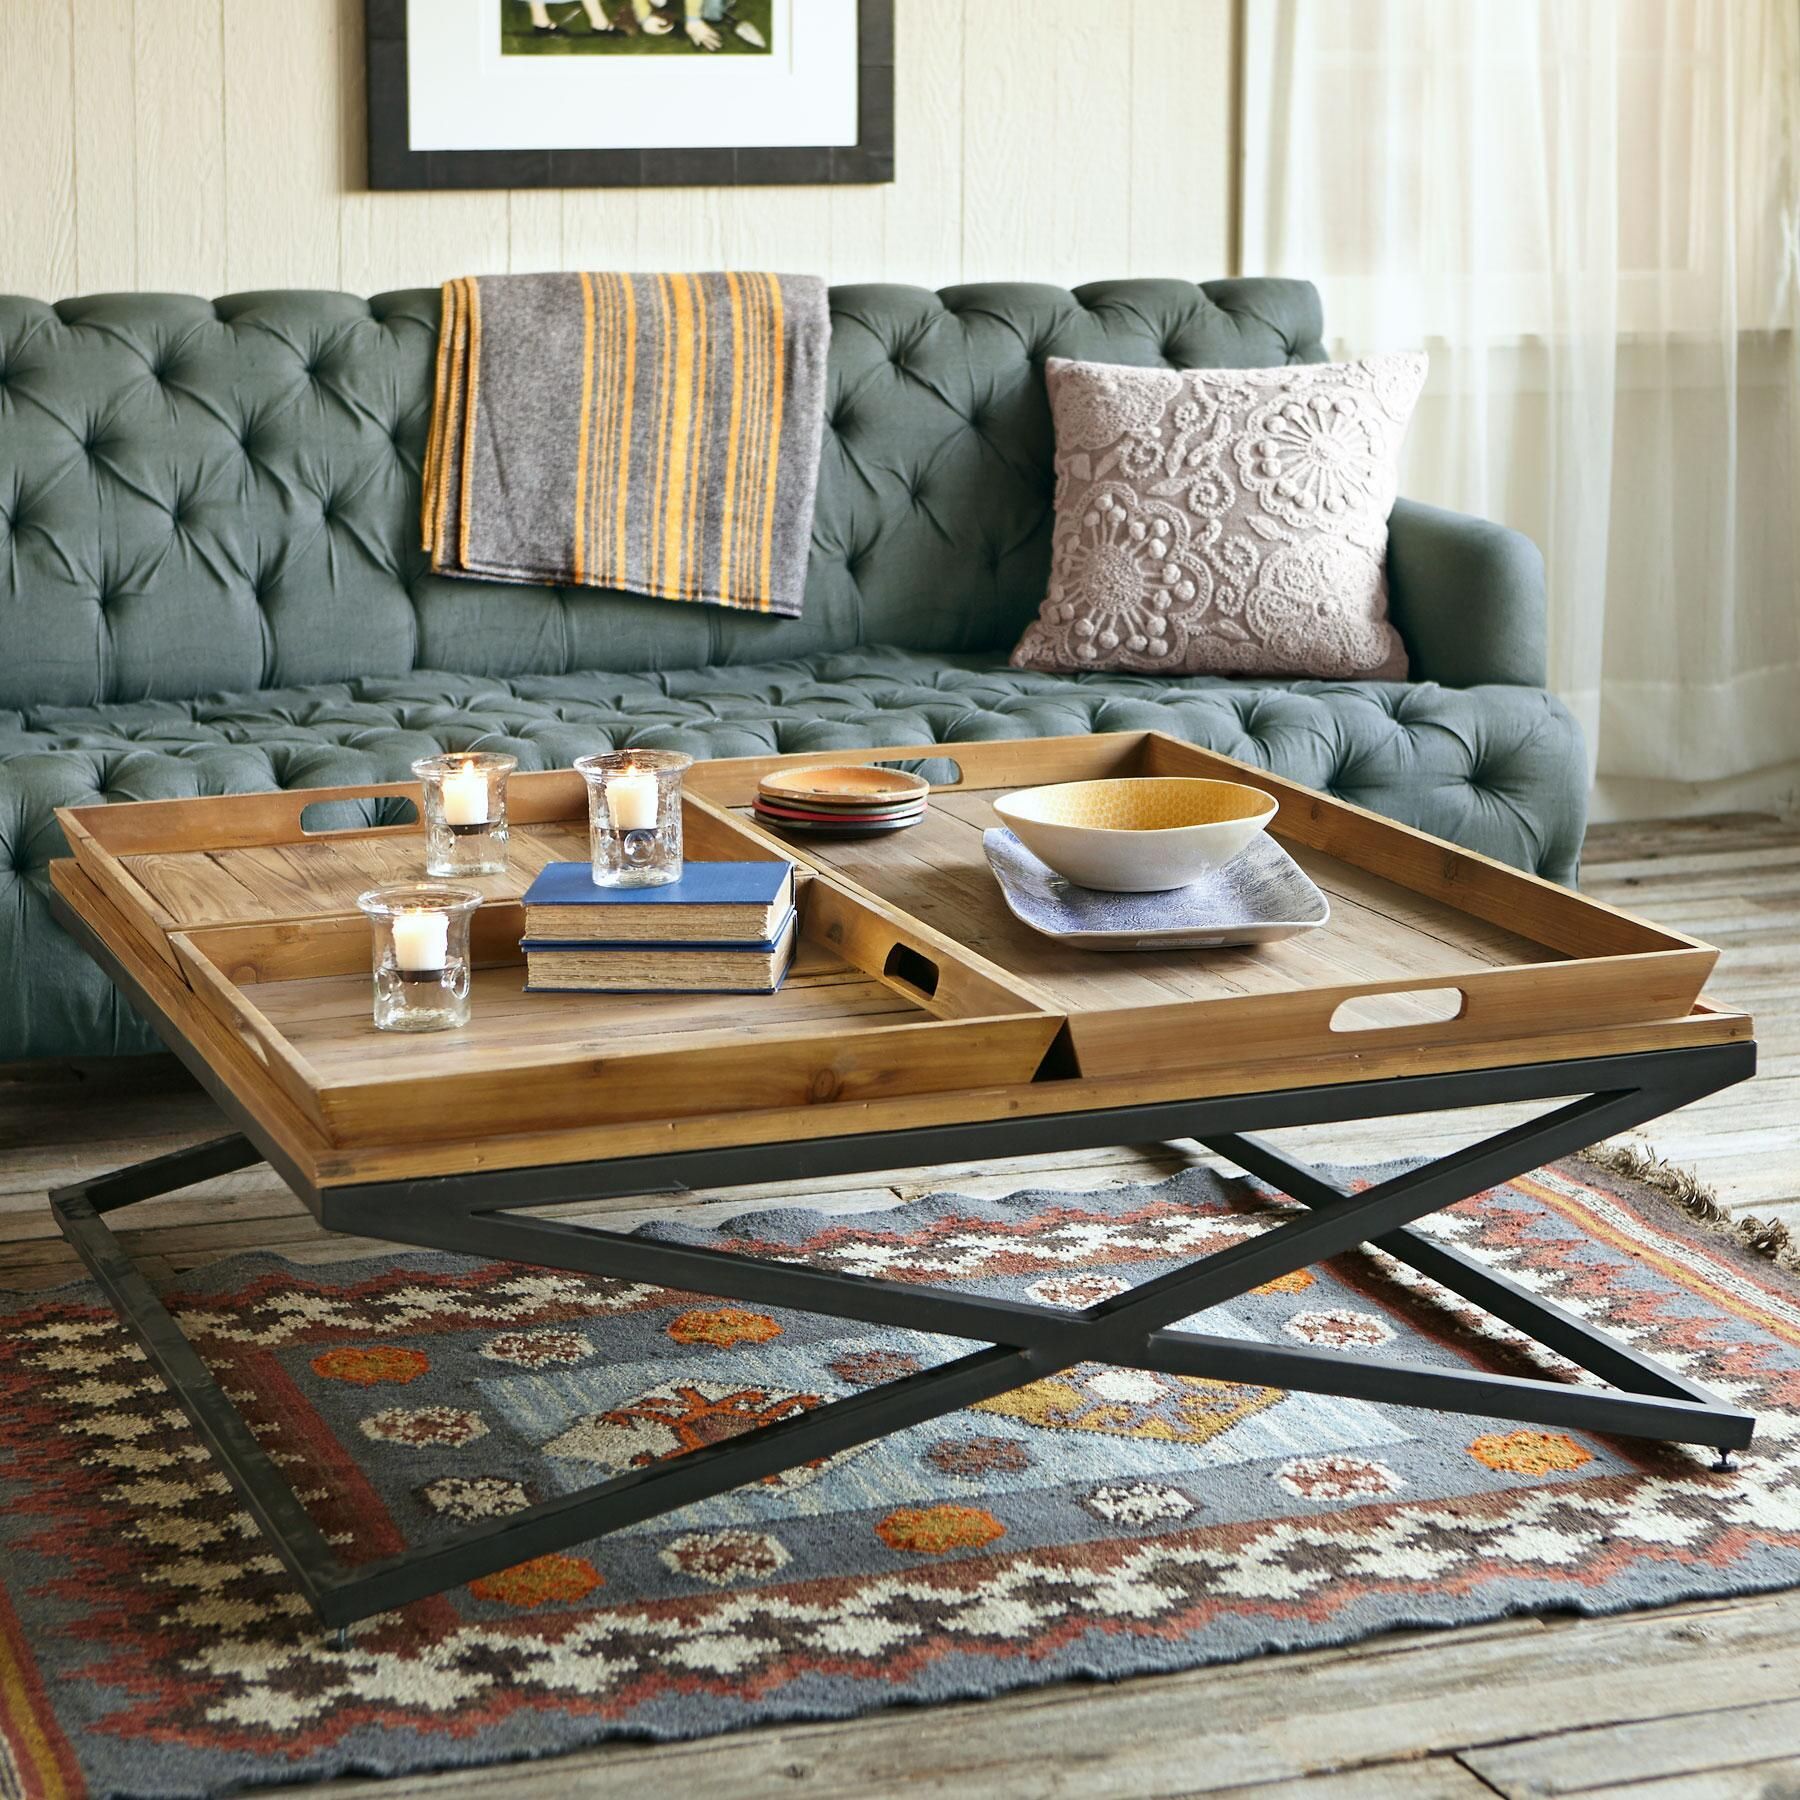 Tray Coffee Table: A Versatile And Stylish Addition To Your Home Within Coffee Tables With Trays (View 2 of 15)